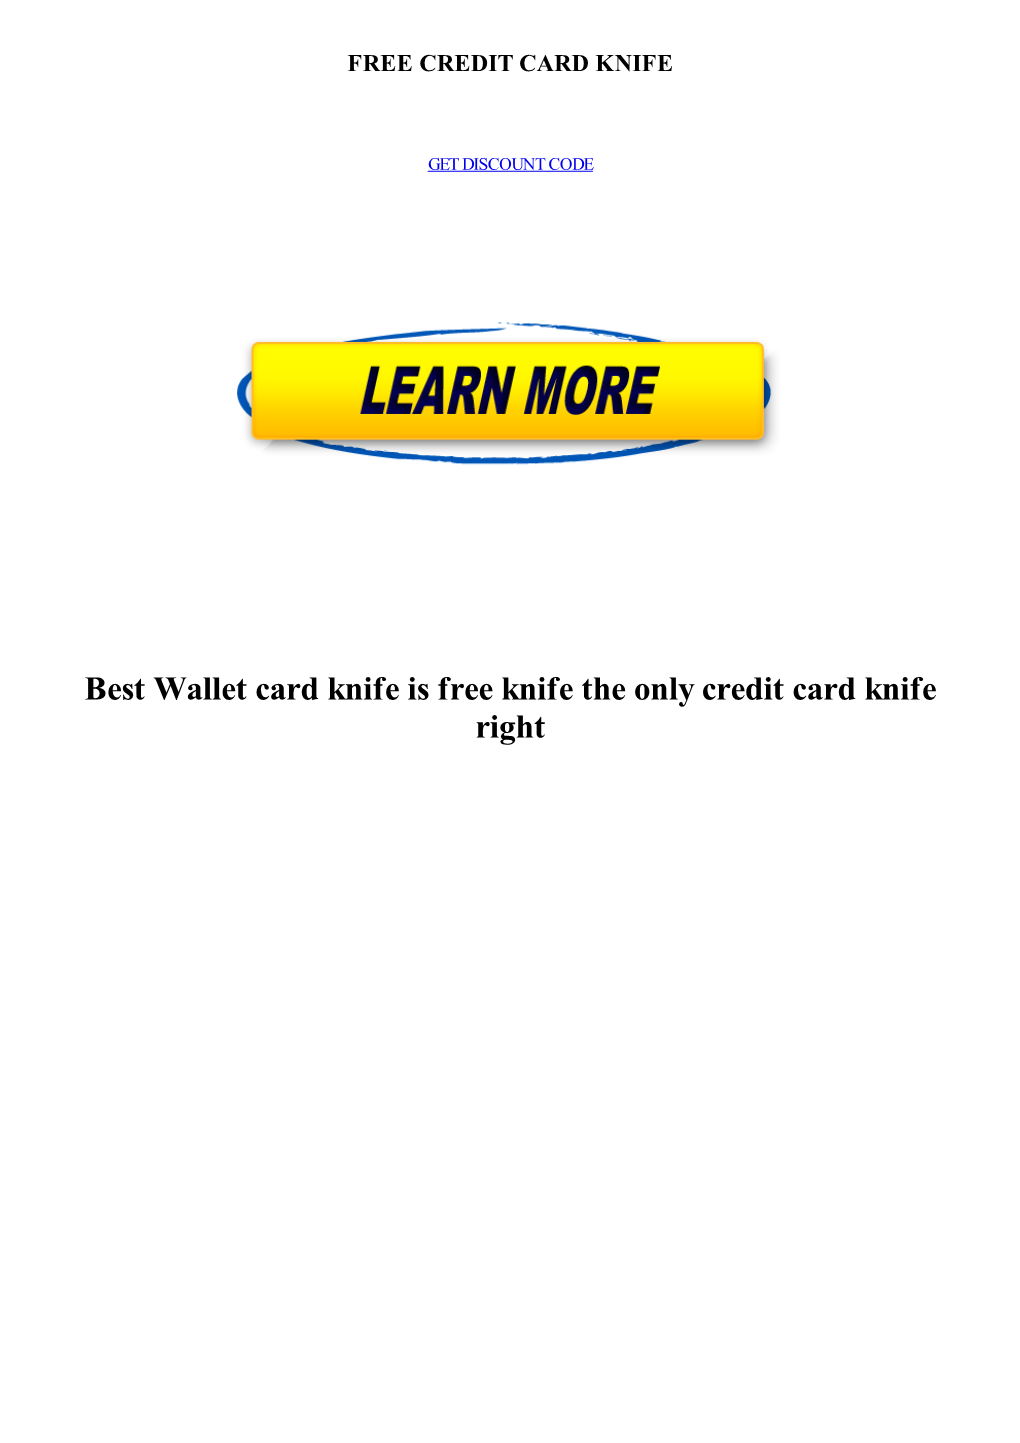 Best Wallet Card Knife Is Free Knife the Only Credit Card Knife Right